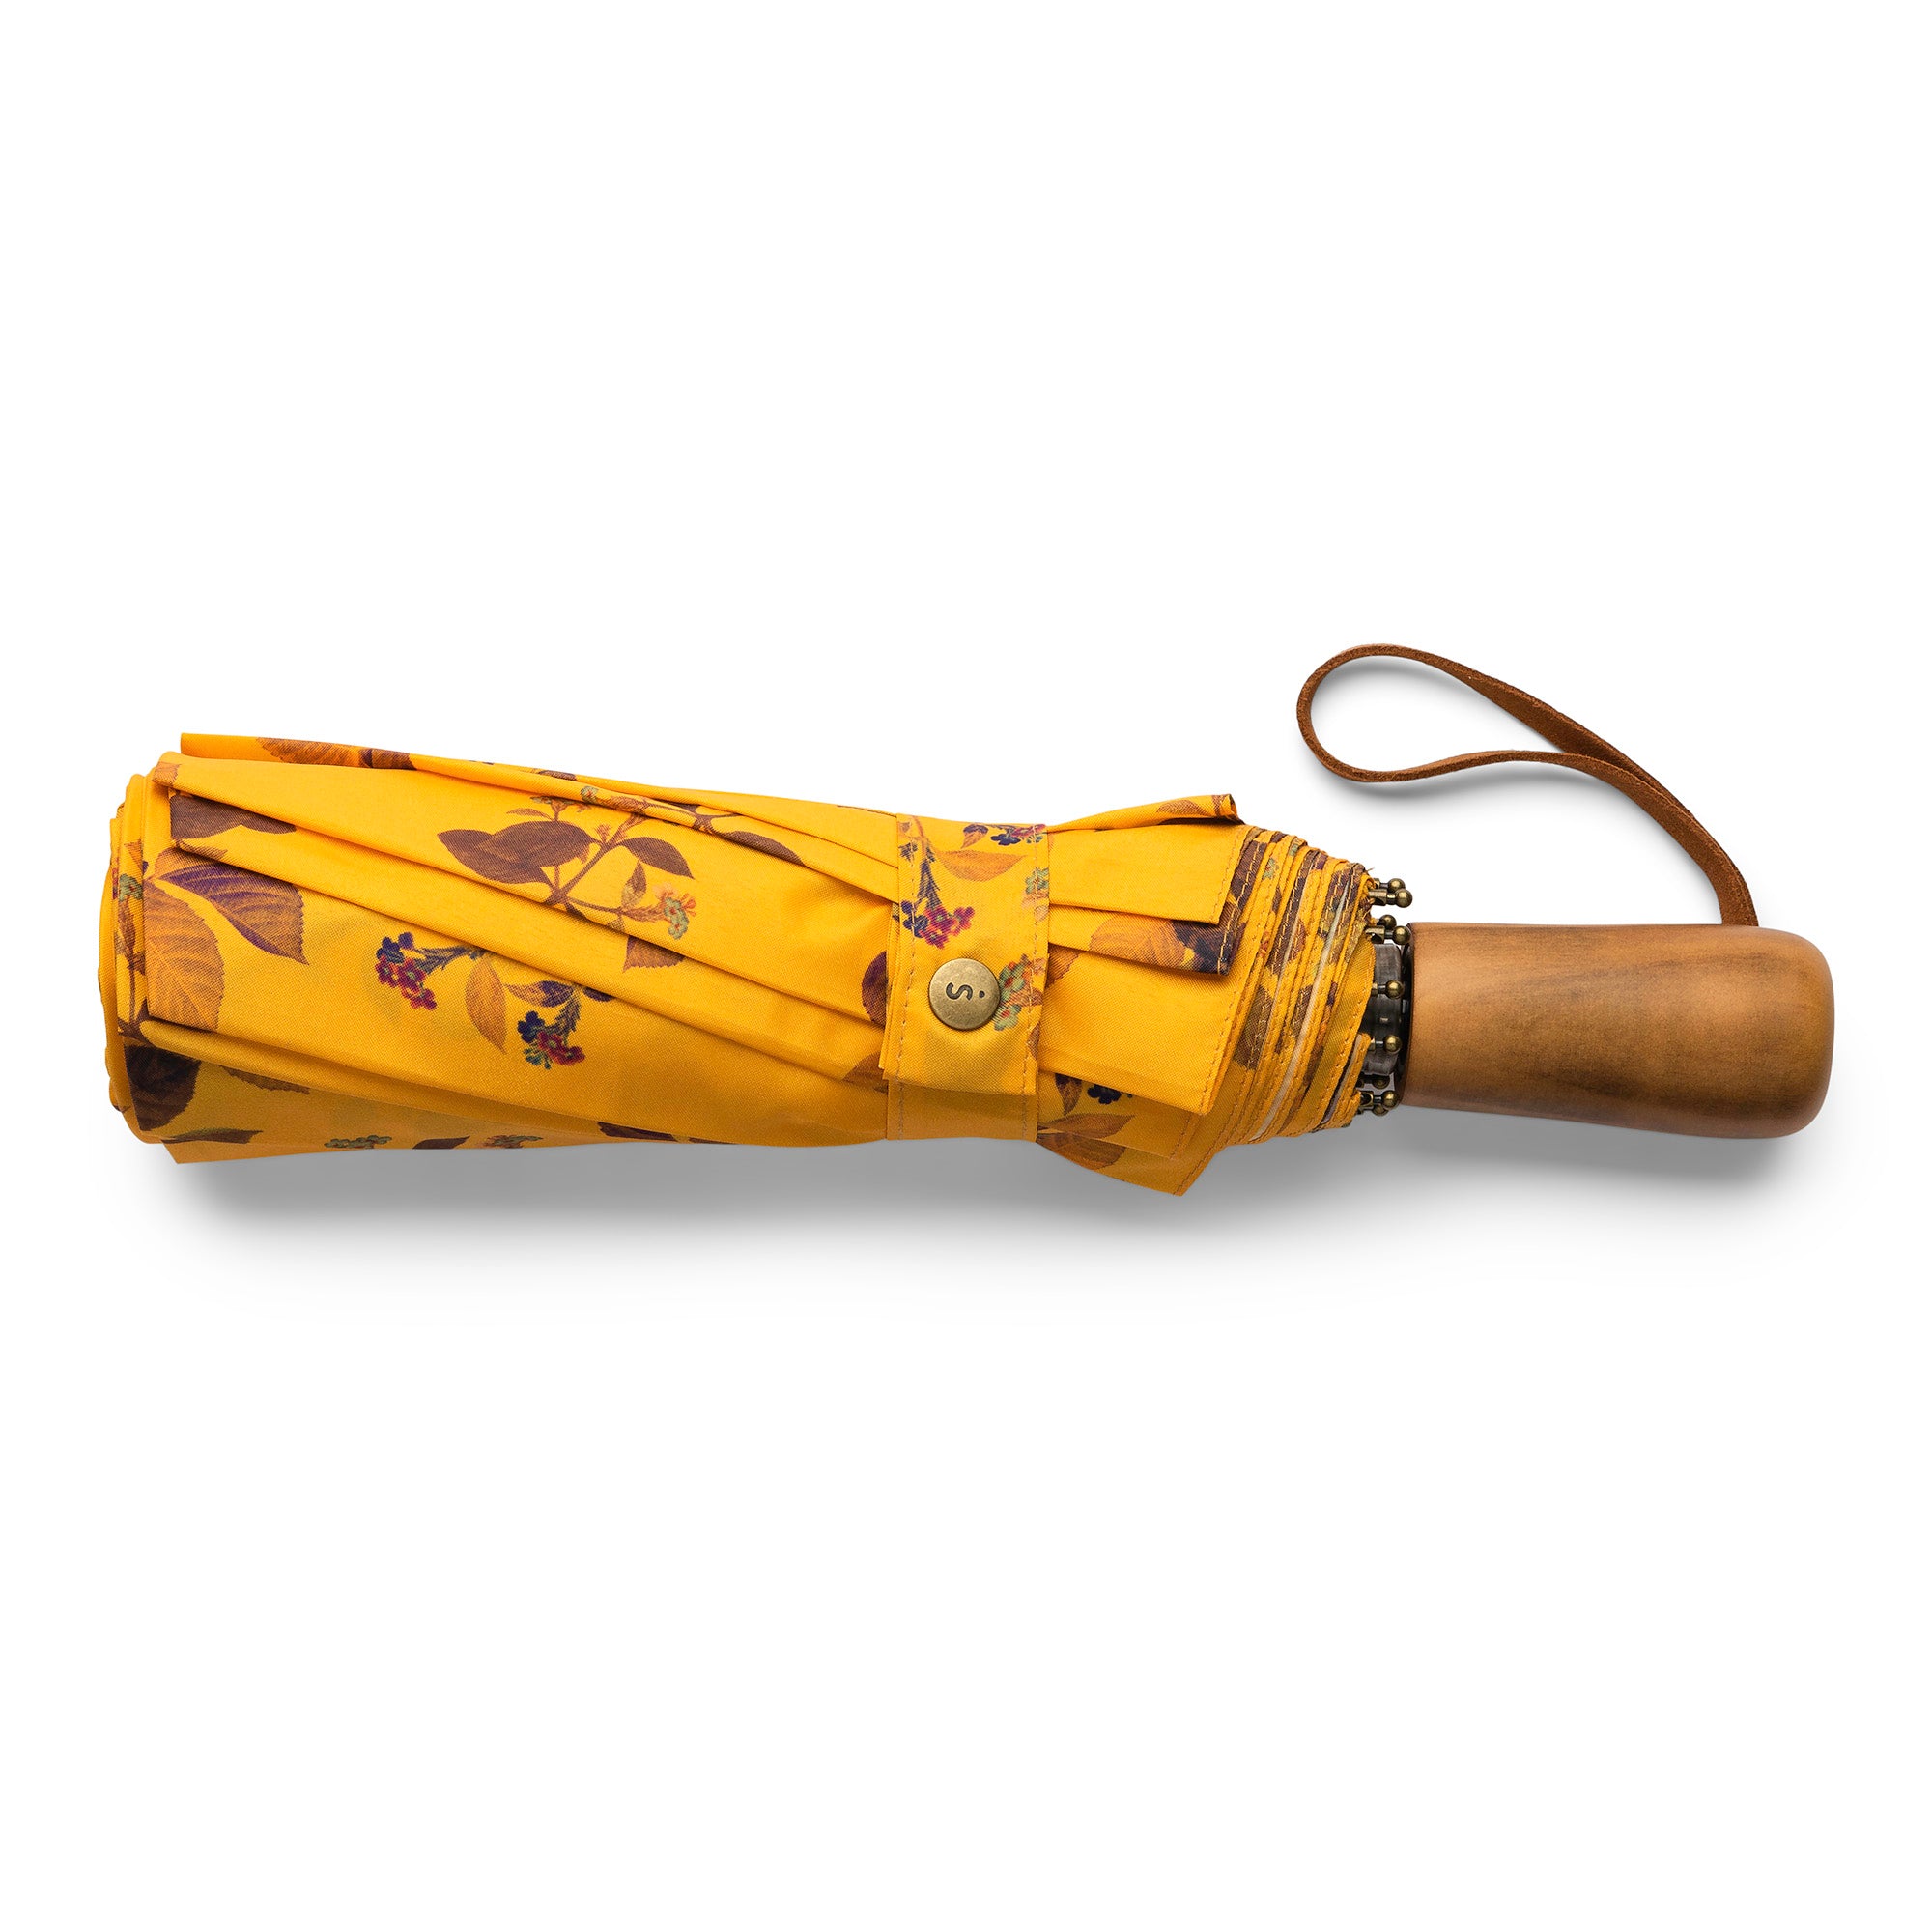 1940s Vintage Style Manual Compact Umbrella; yellow with flowers